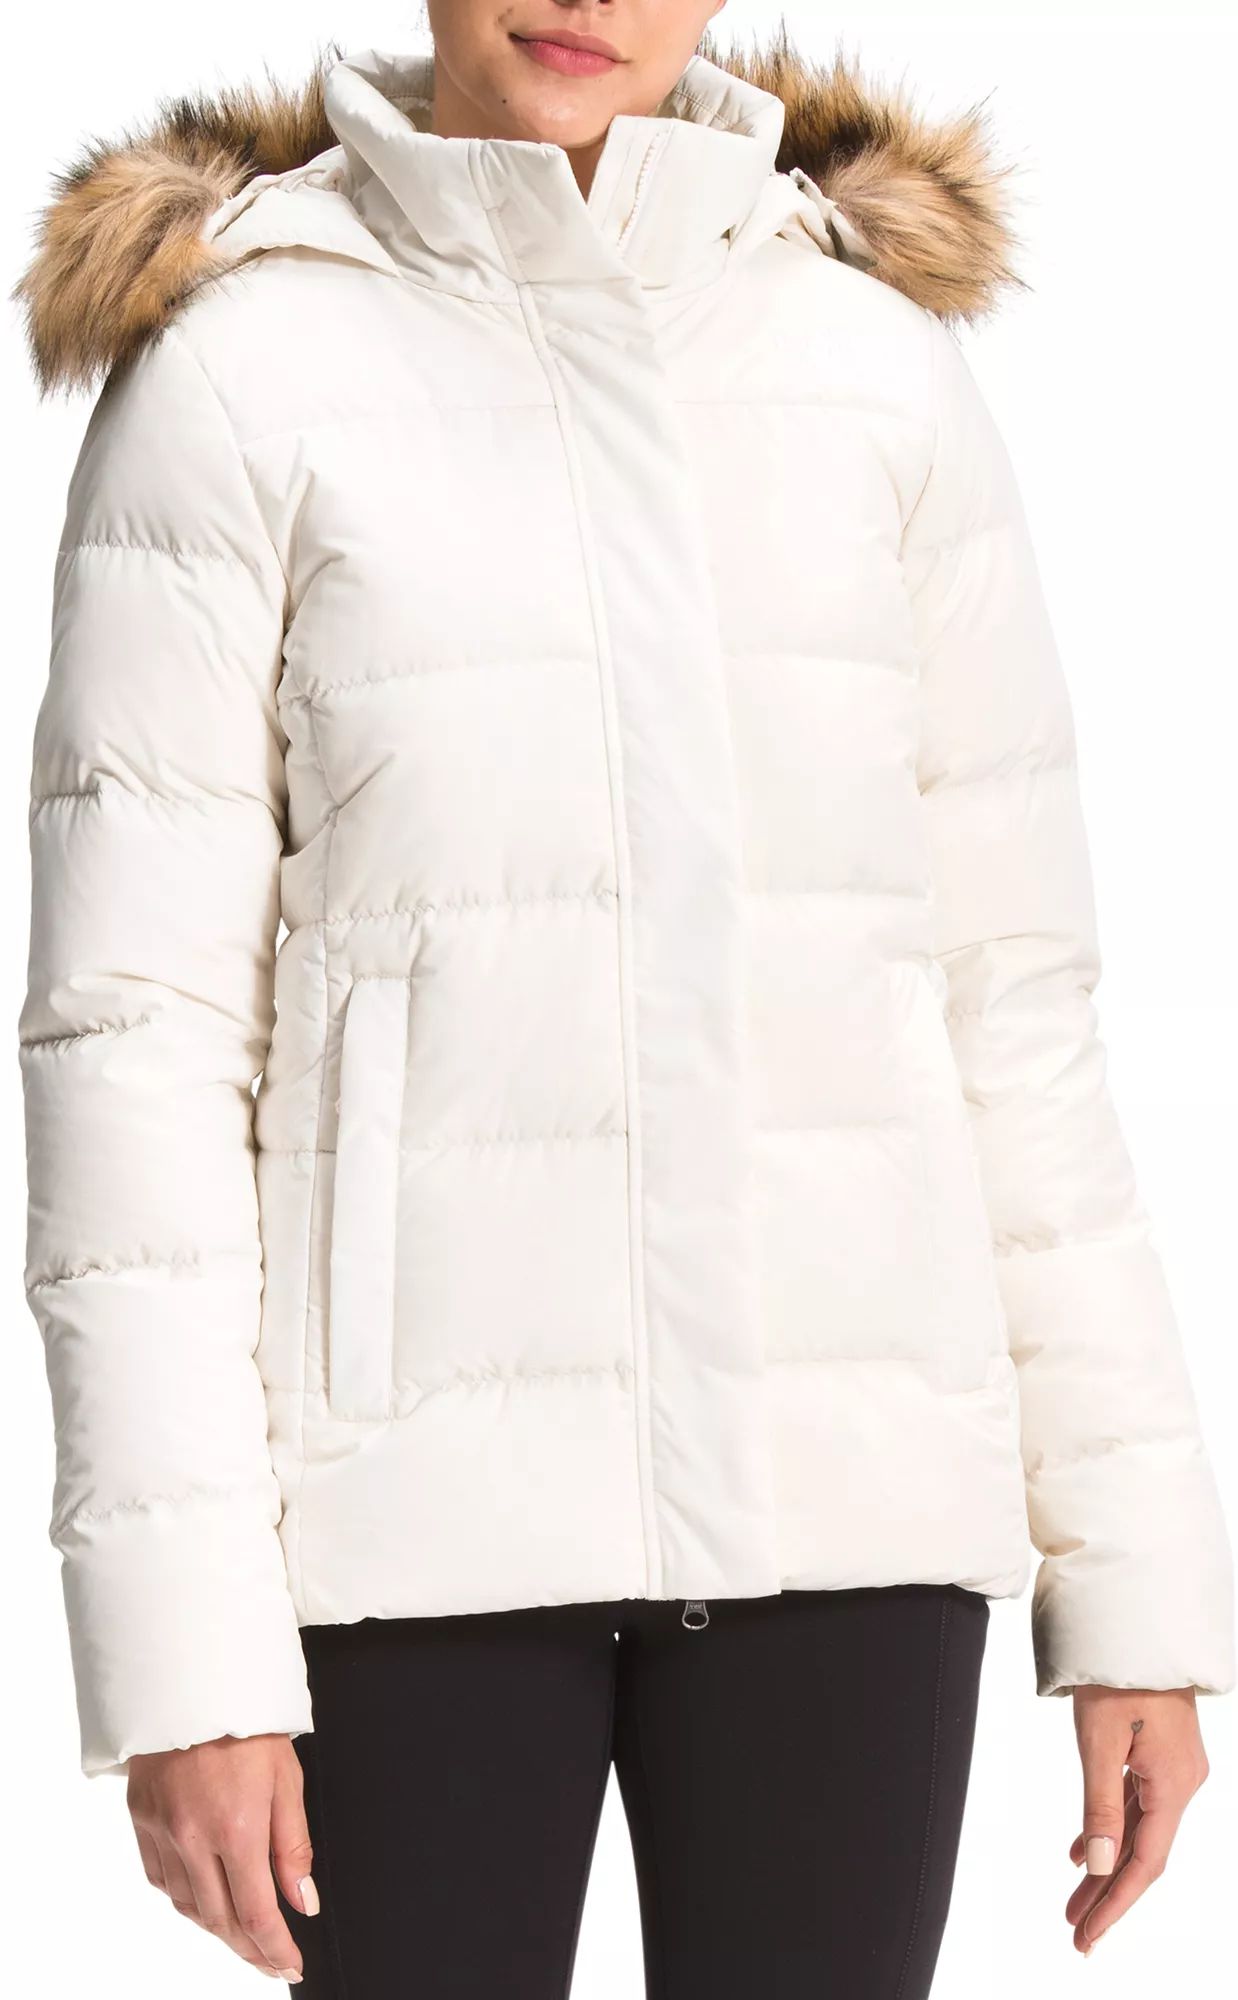 The North Face Women's Gotham Jacket, Large, Gardenia White | Dick's Sporting Goods